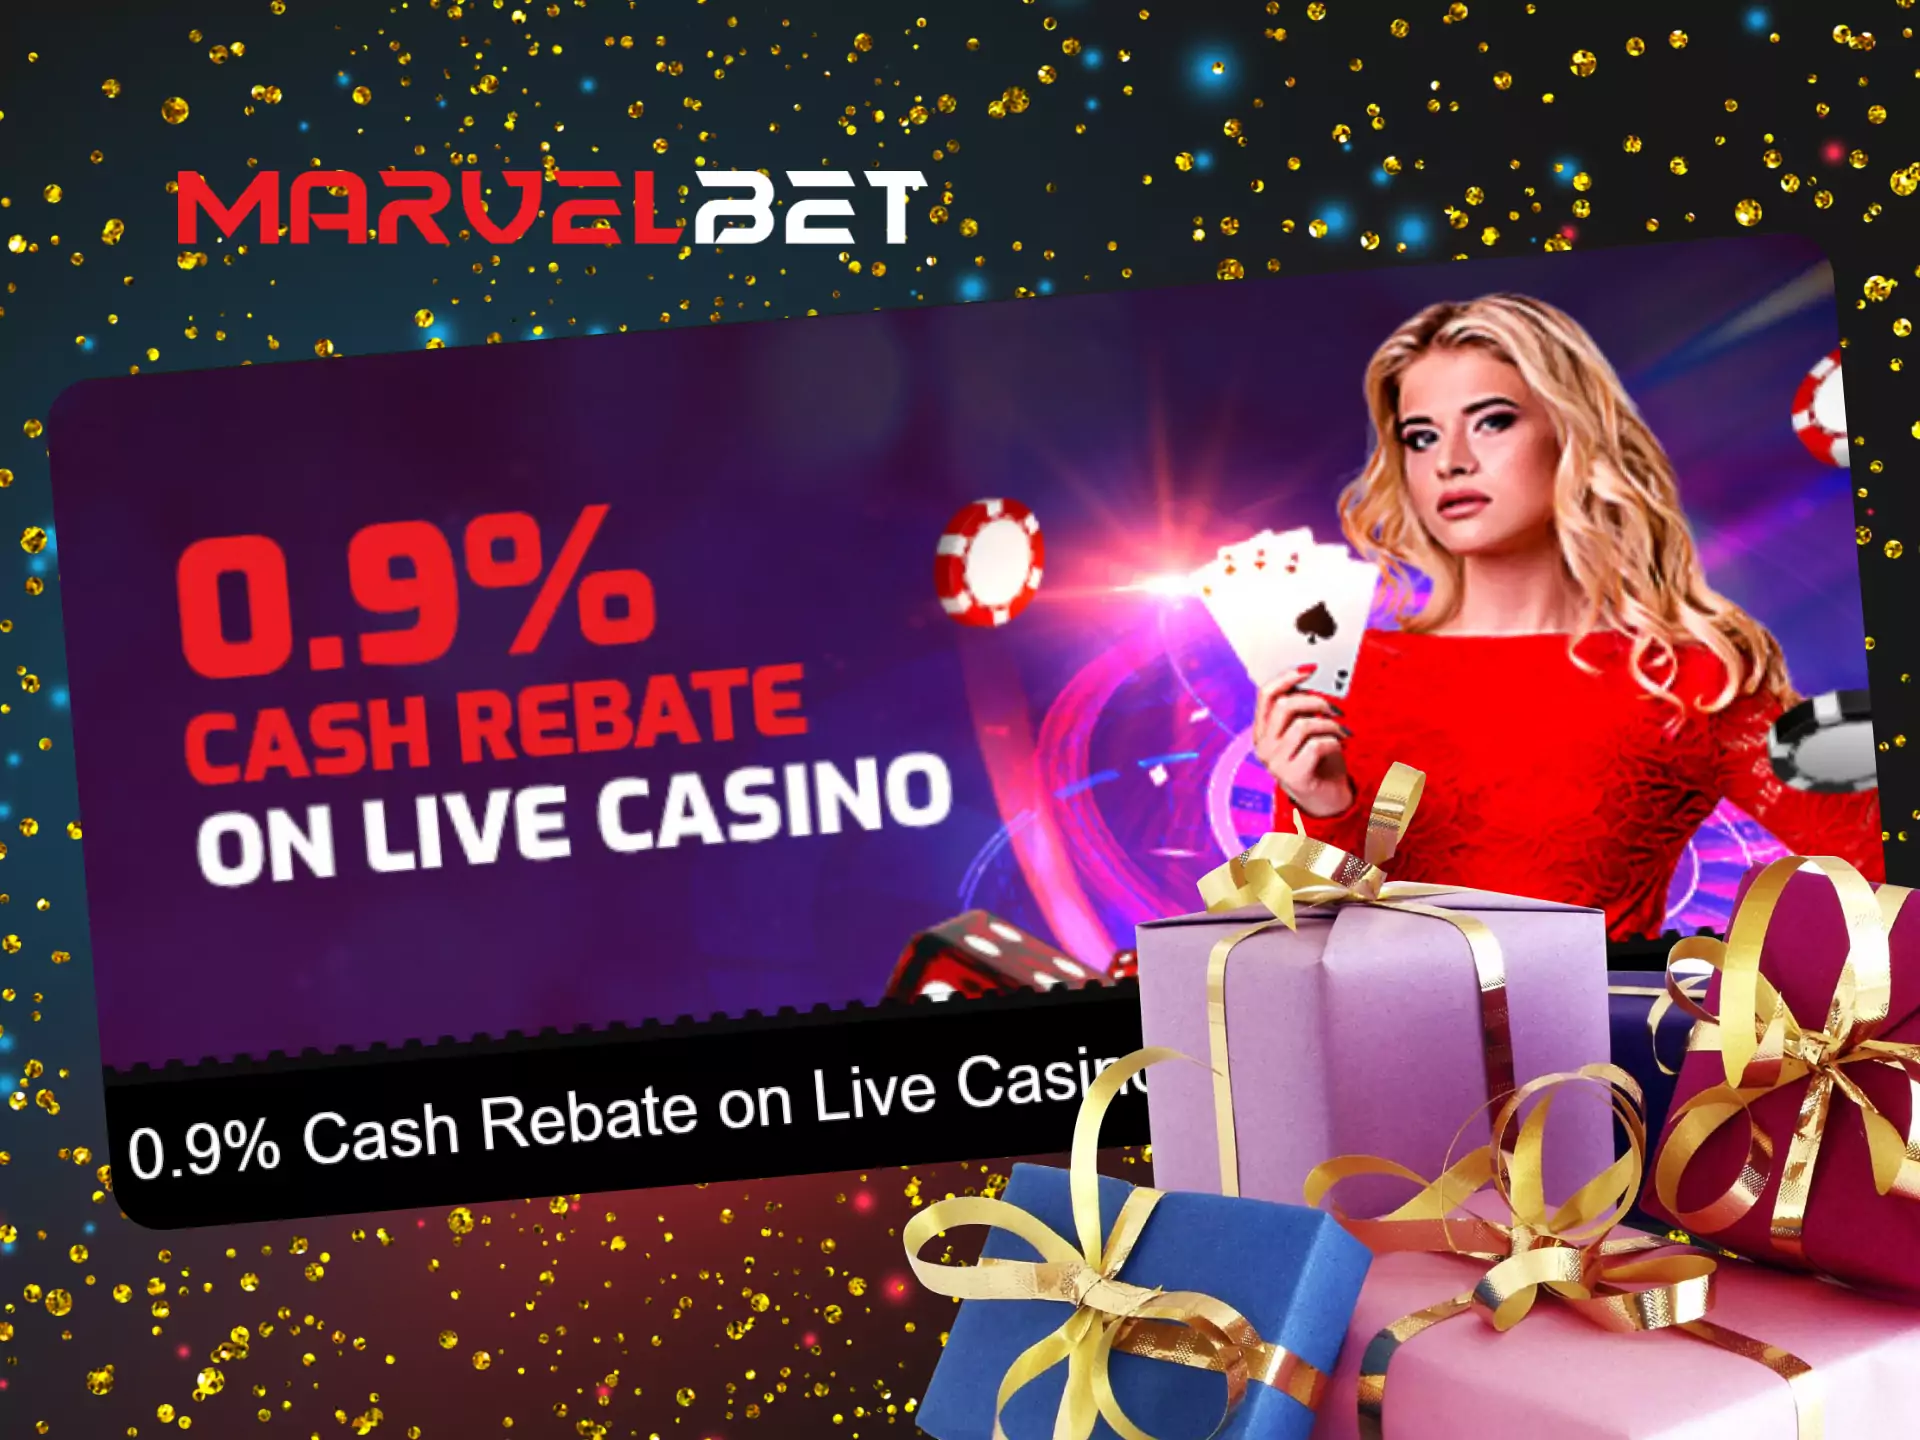 With MarvelBet you can always count on a profitable online casino cashback.